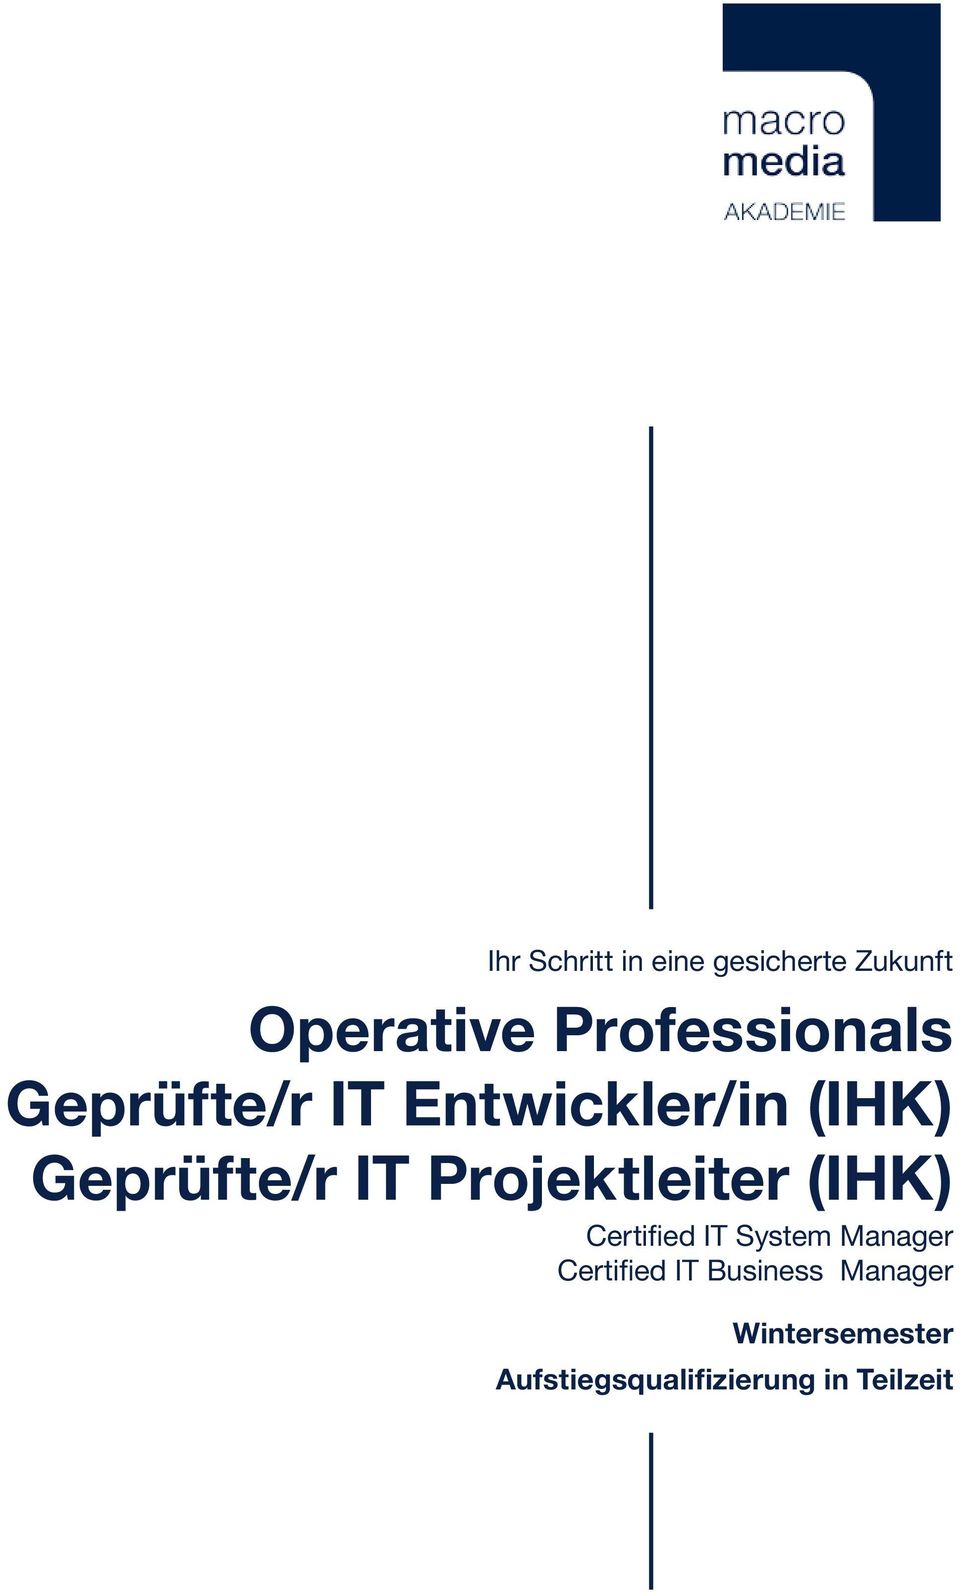 IT Projektleiter (IHK) Certified IT System Manager